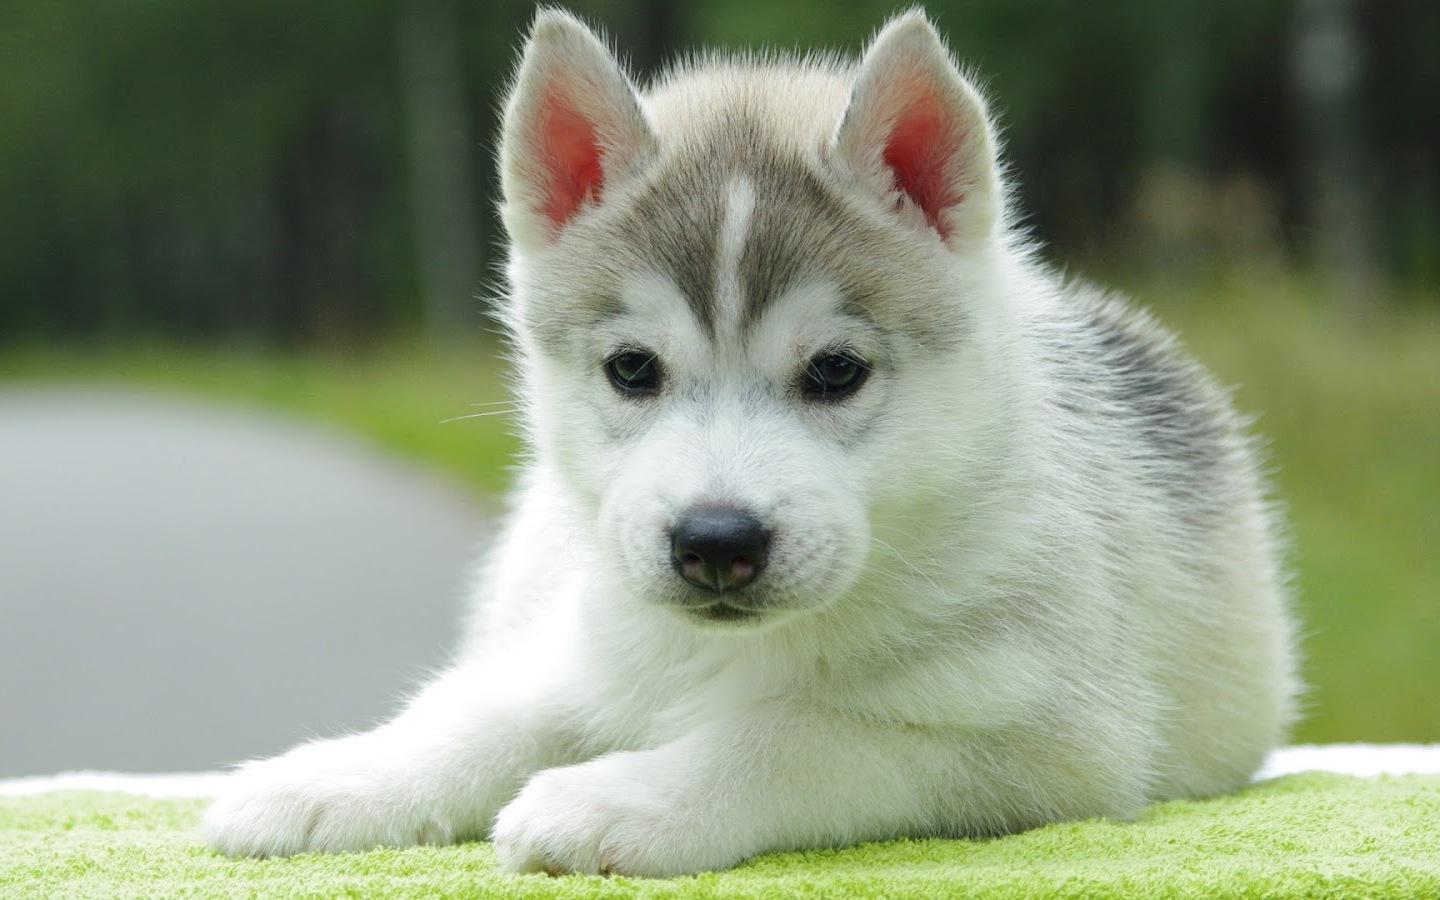 To Cute Puppy Wallpaper For Desktop Mobile Background Next Image